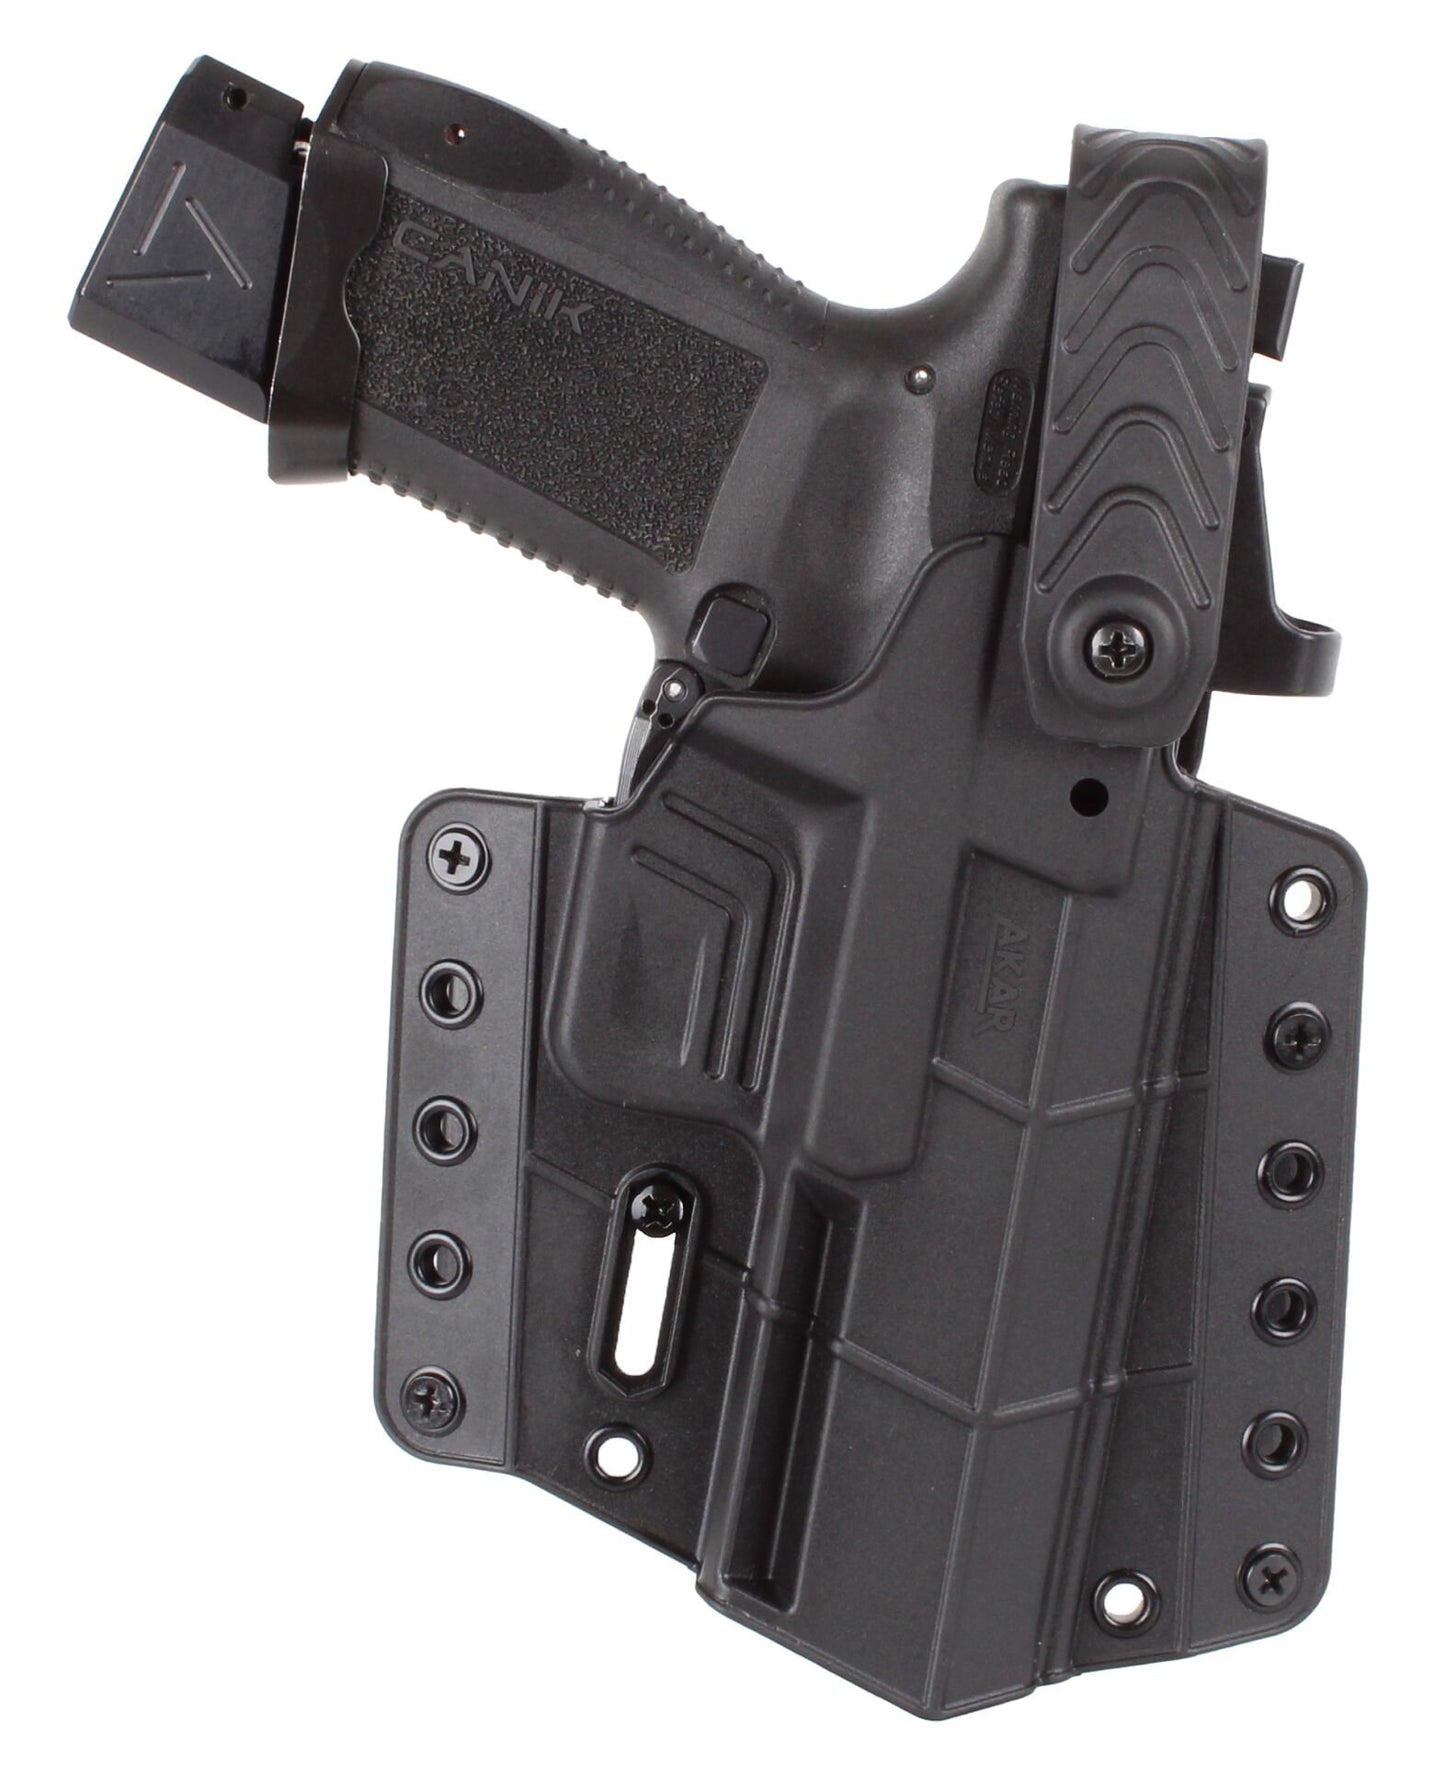 OWB Holster Compatible with Canik TP9 Series, TP9DA, TP9SA MOD.2, TP9SF, TP9SF Elite-S, TP9SA, Outside Waistband Carry Holster with Level II Retention, Closed Lock System